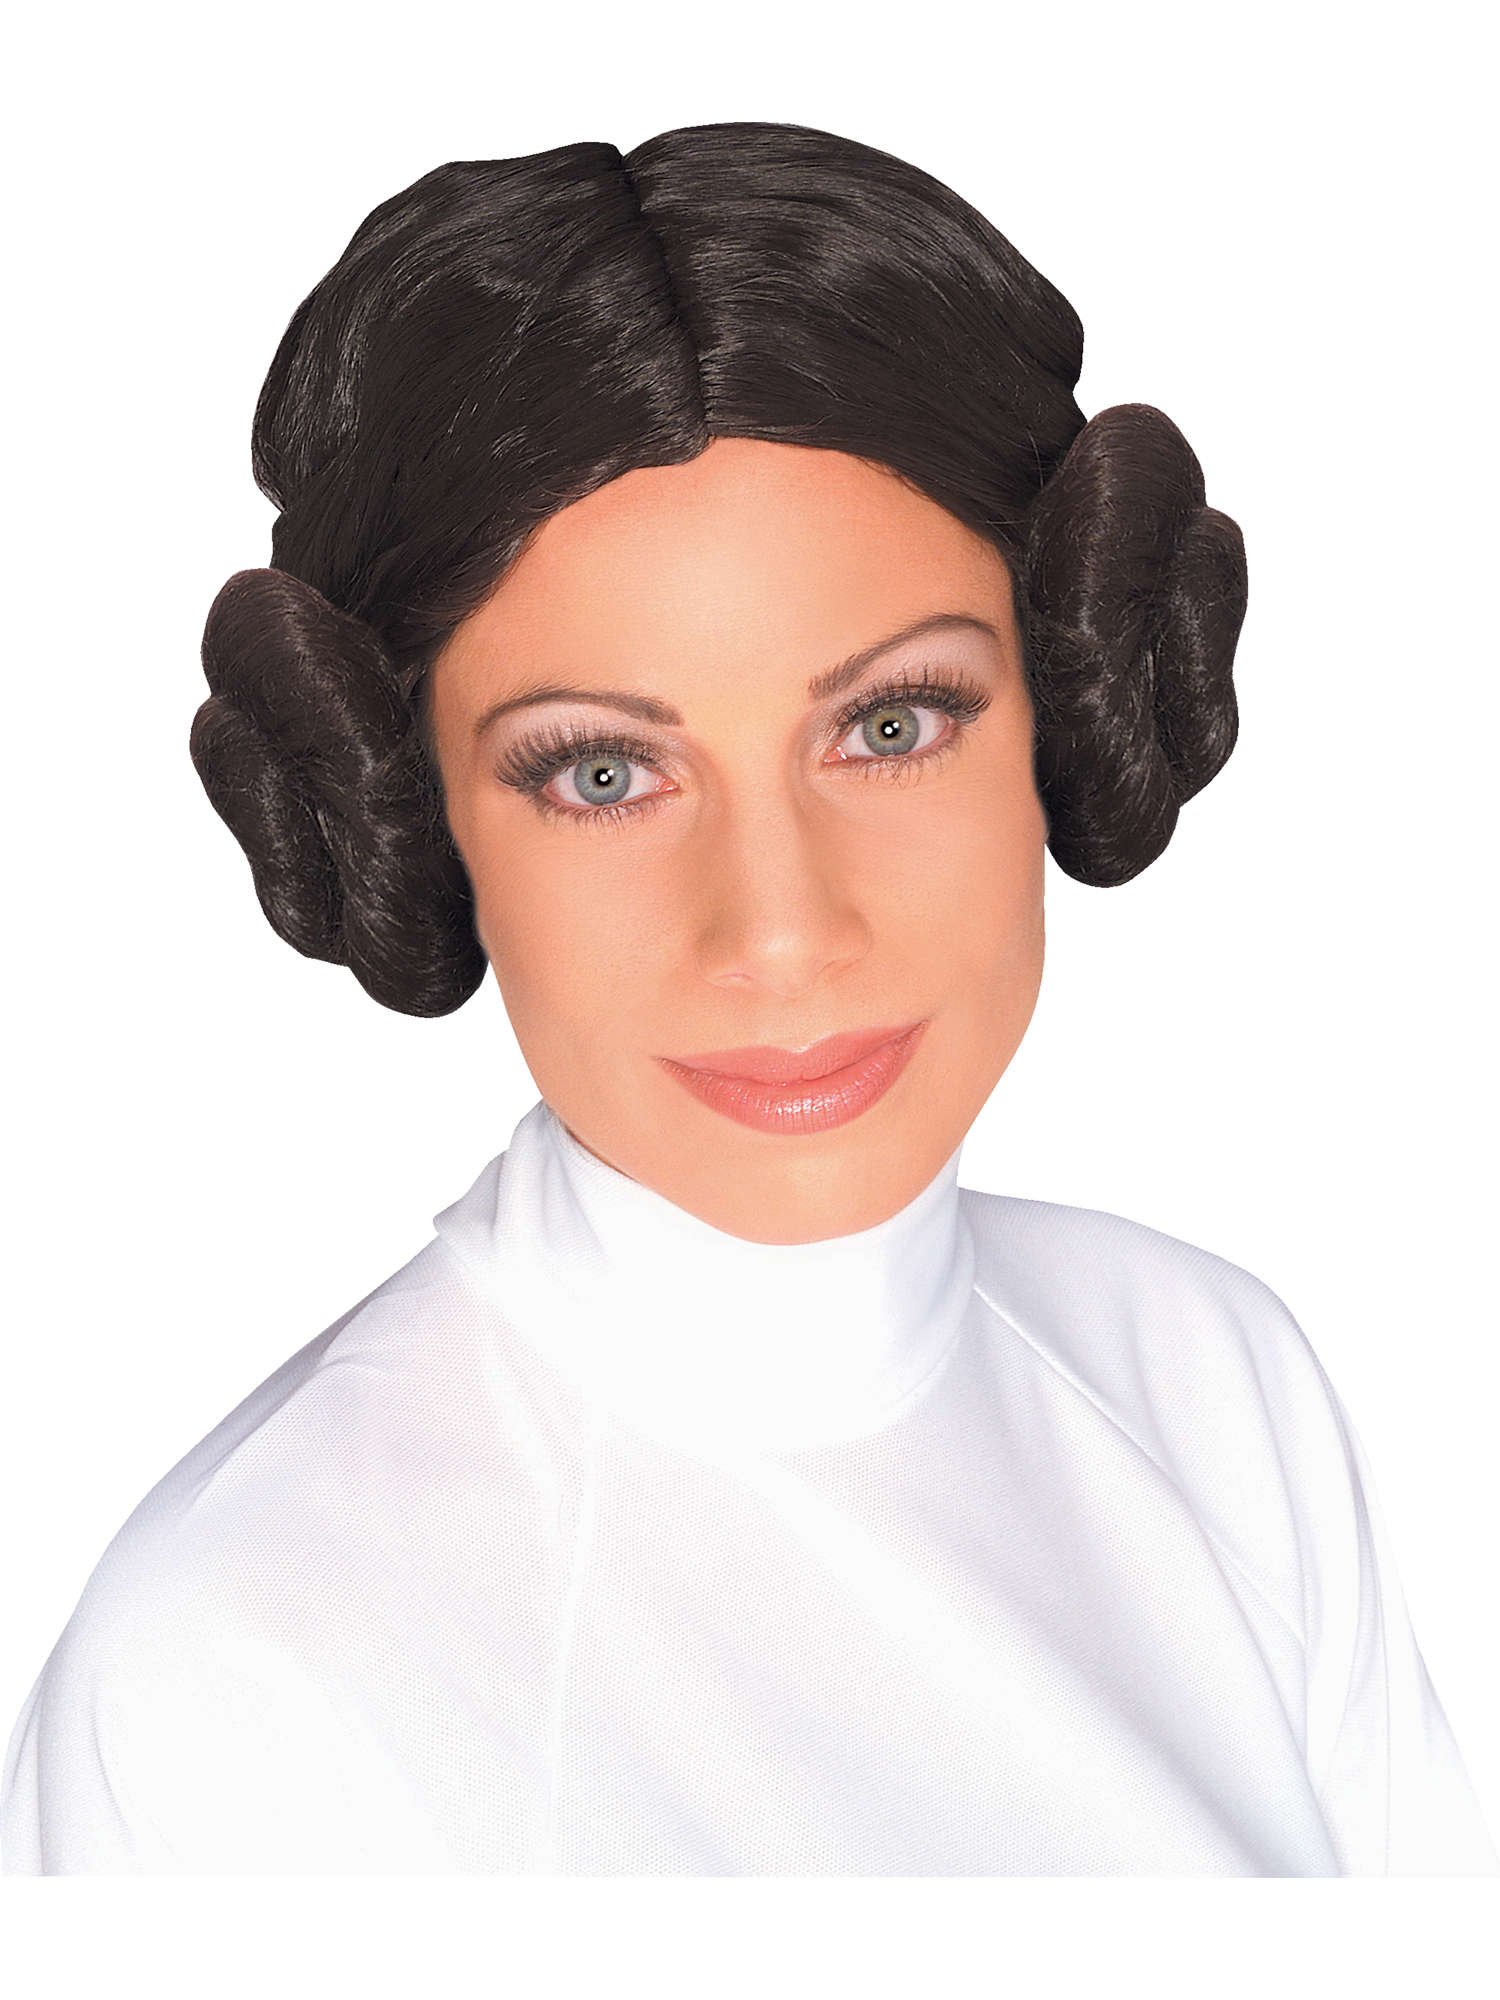 Princess Leia, A New Hope, A New Hope, A New Hope, Multi, Star Wars, Wig, One Size, Front